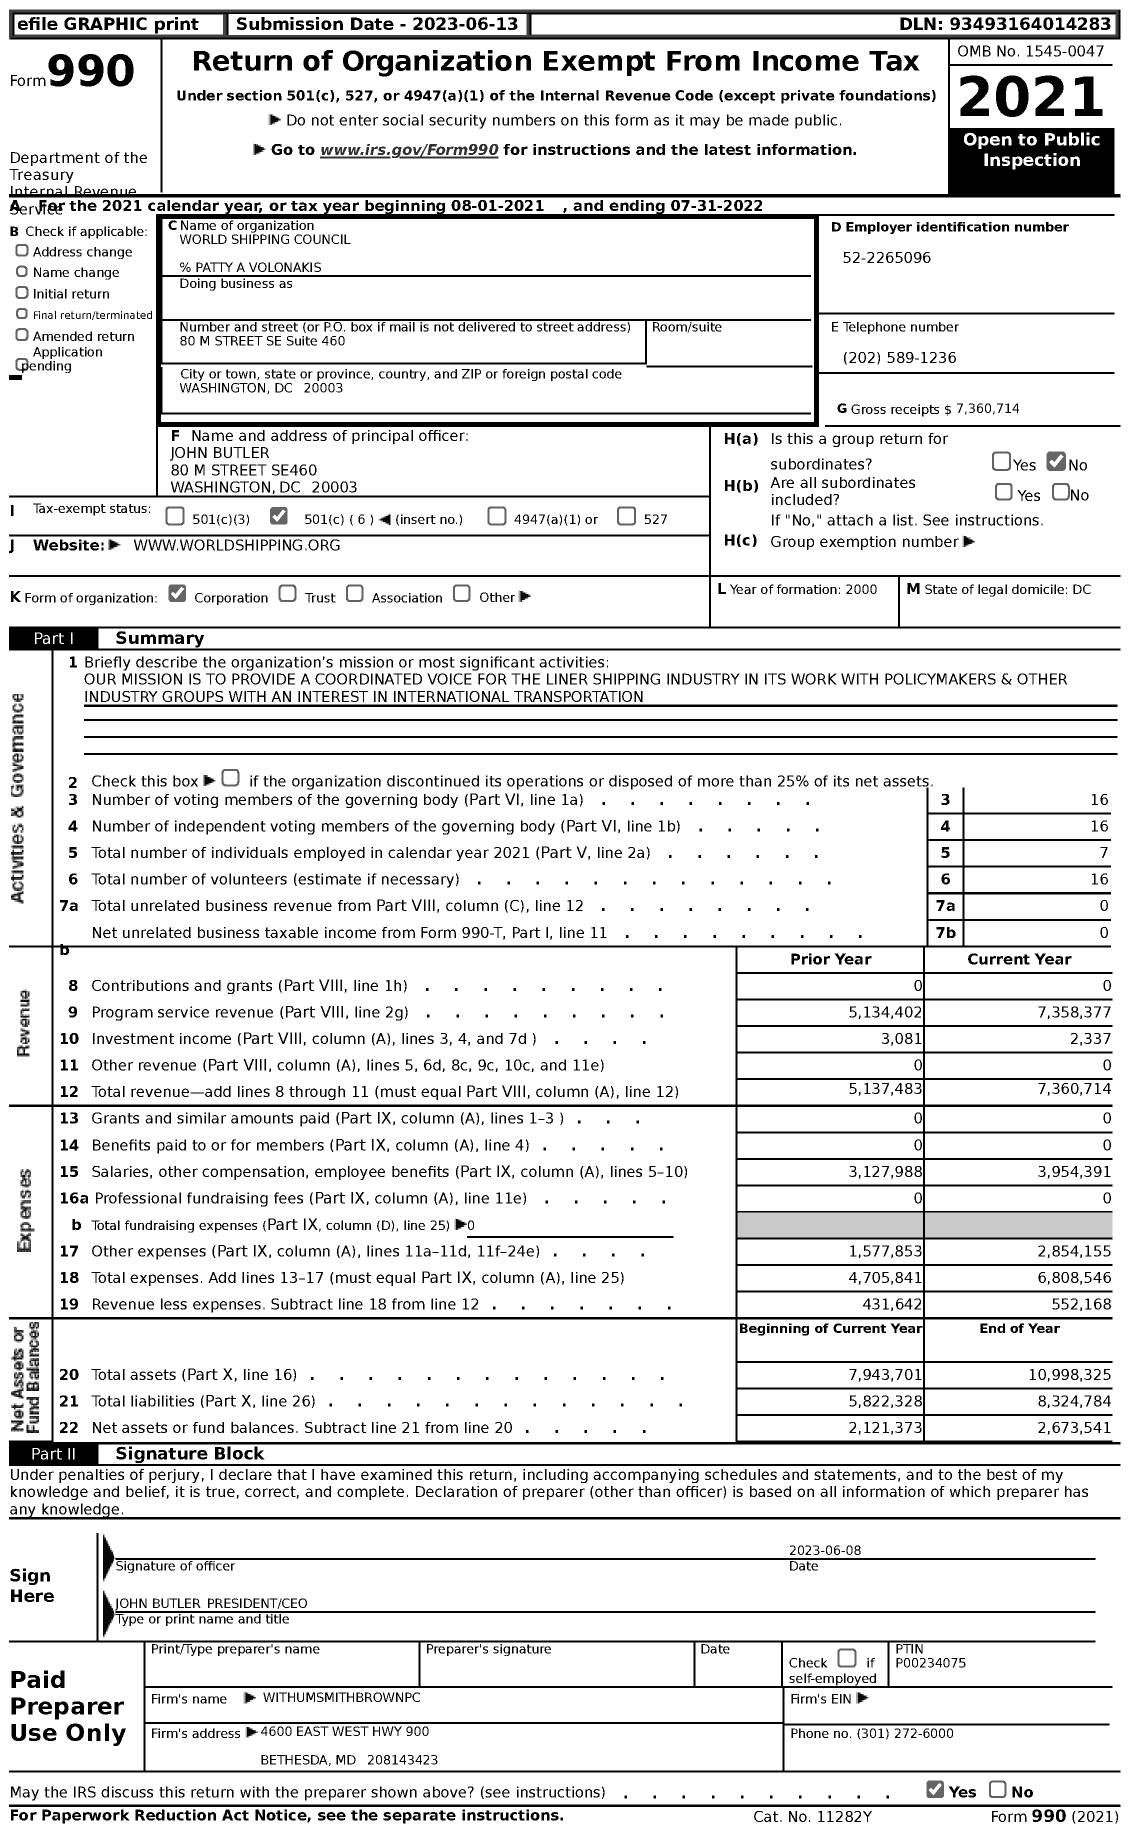 Image of first page of 2021 Form 990 for World Shipping Council (WSC)